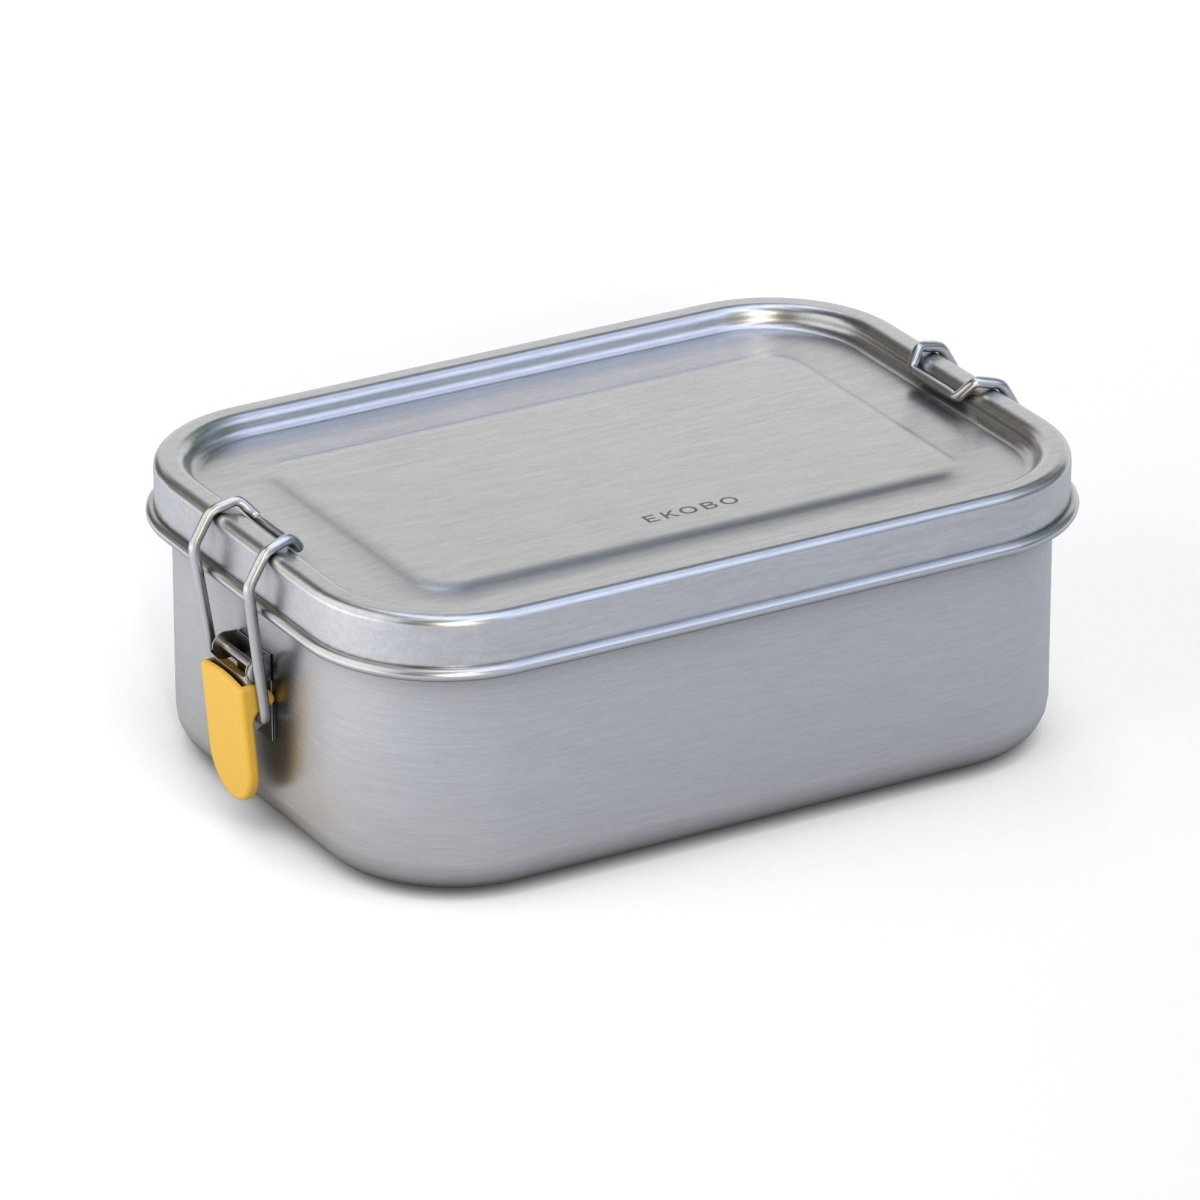 EKOBO Stainless Steel Lunch Box with Heat Safe Insert - Lemon - lily & onyx